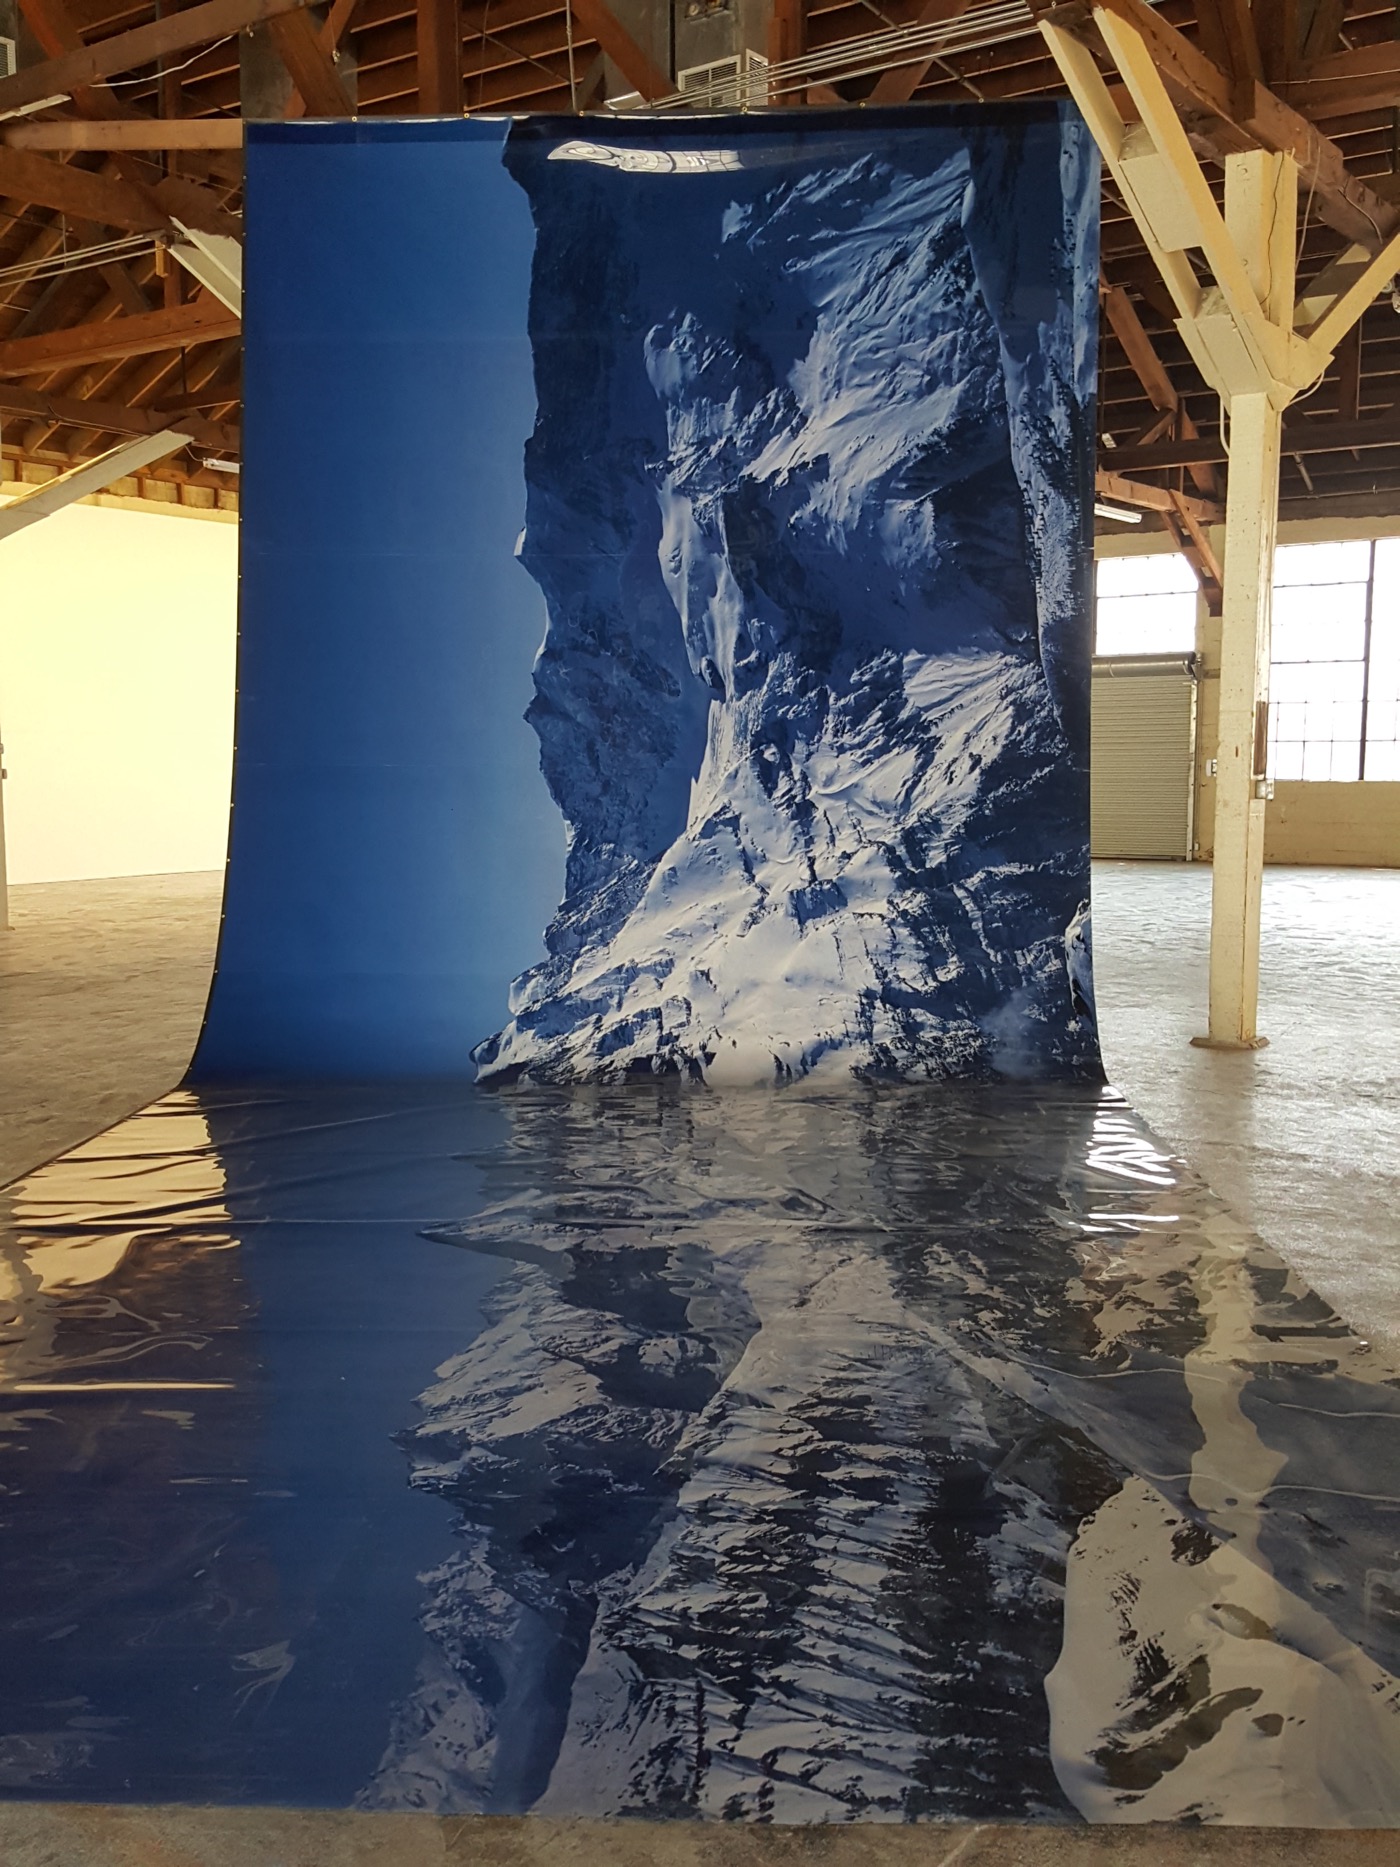 An installation by the artist Lutz Bacher "Magic Mountain" at 356 Mission Road